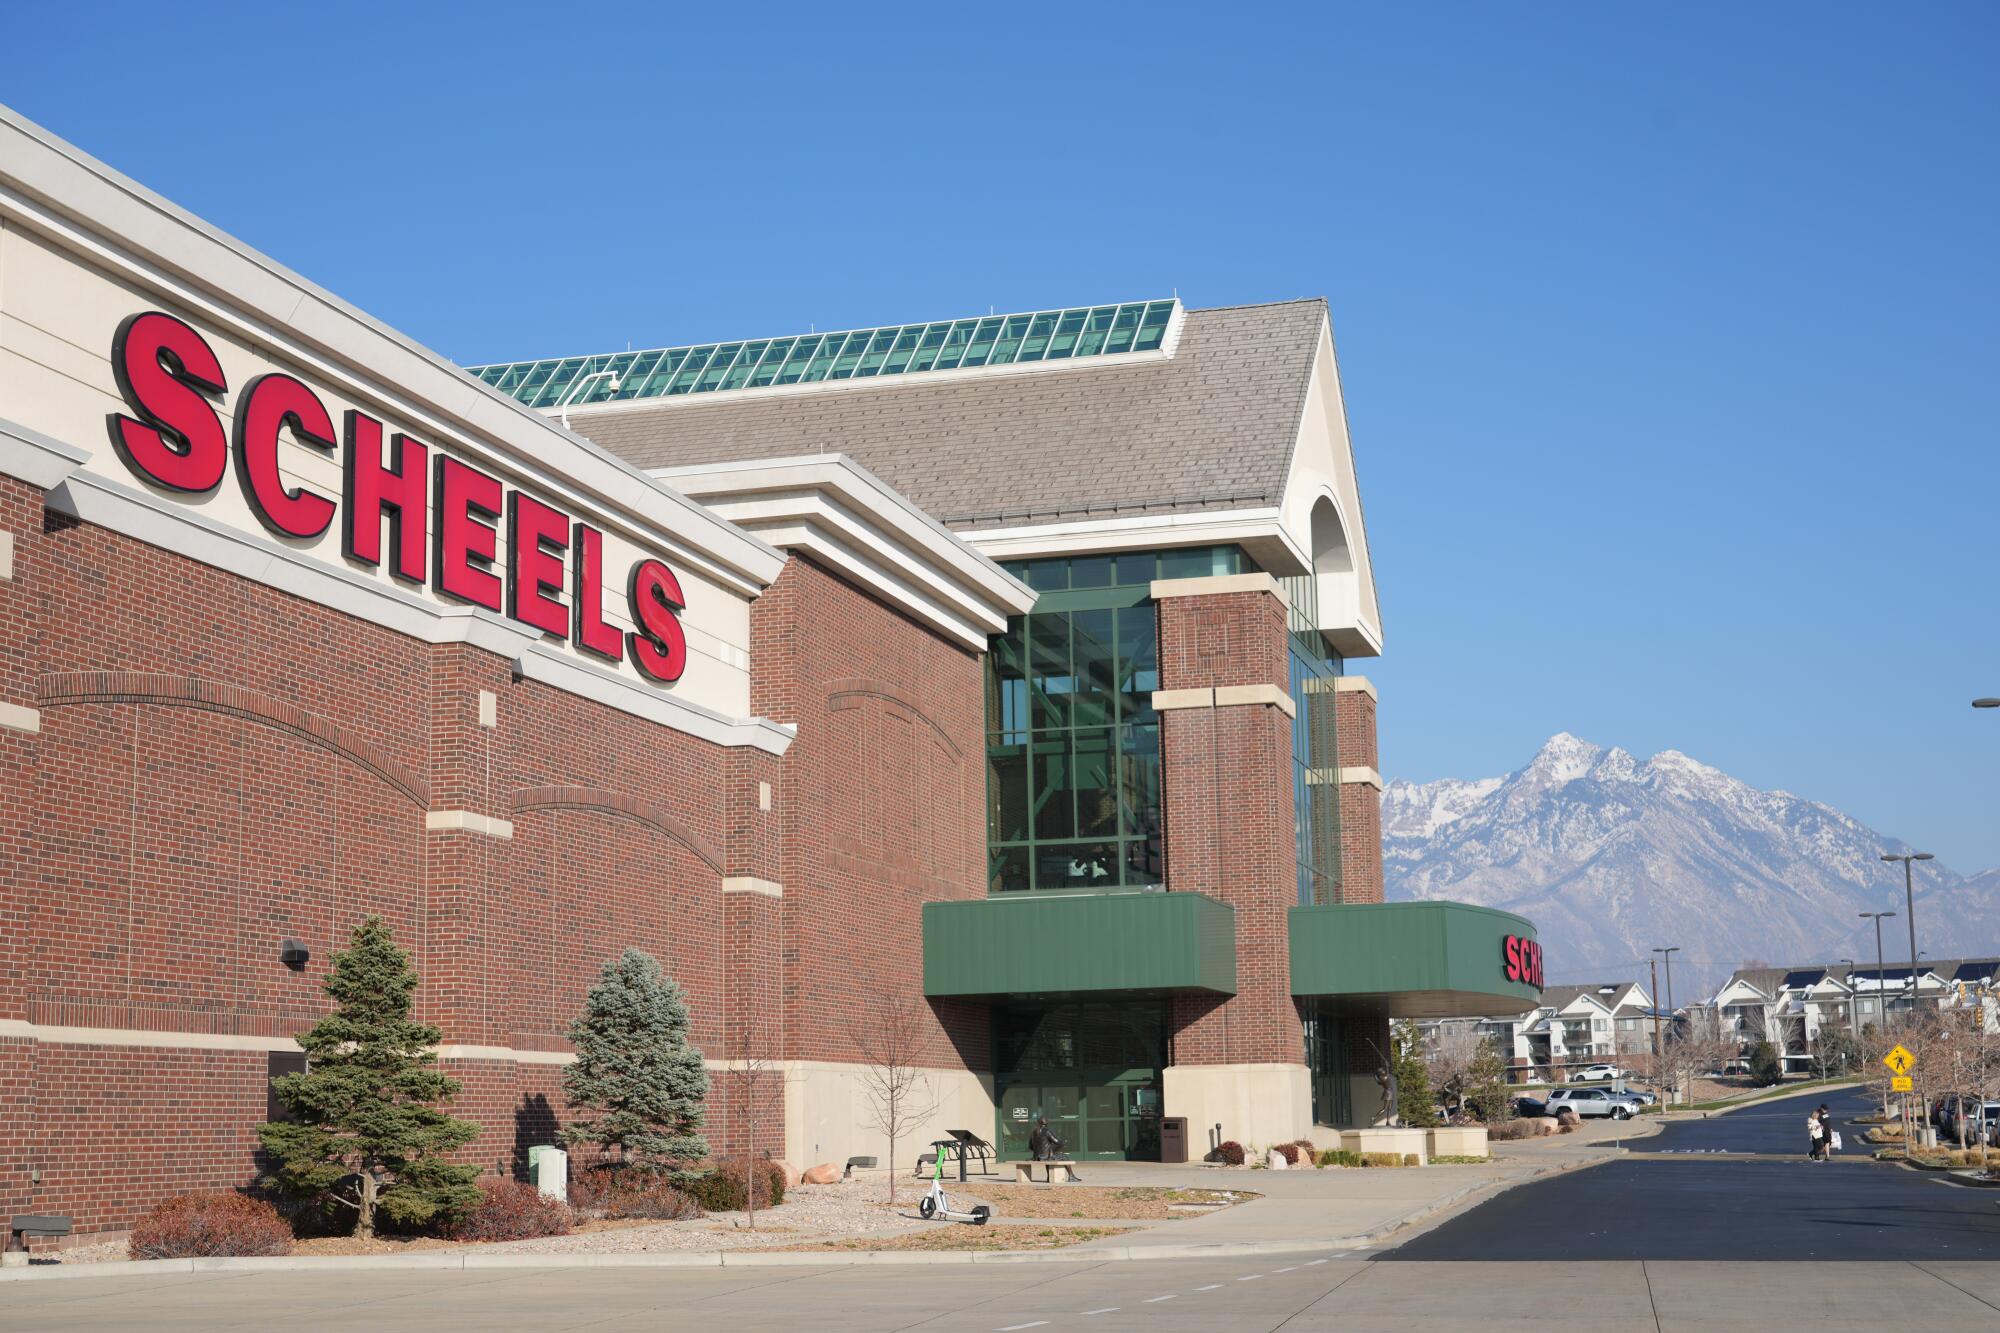 The outside of a Scheels sporting goods store.